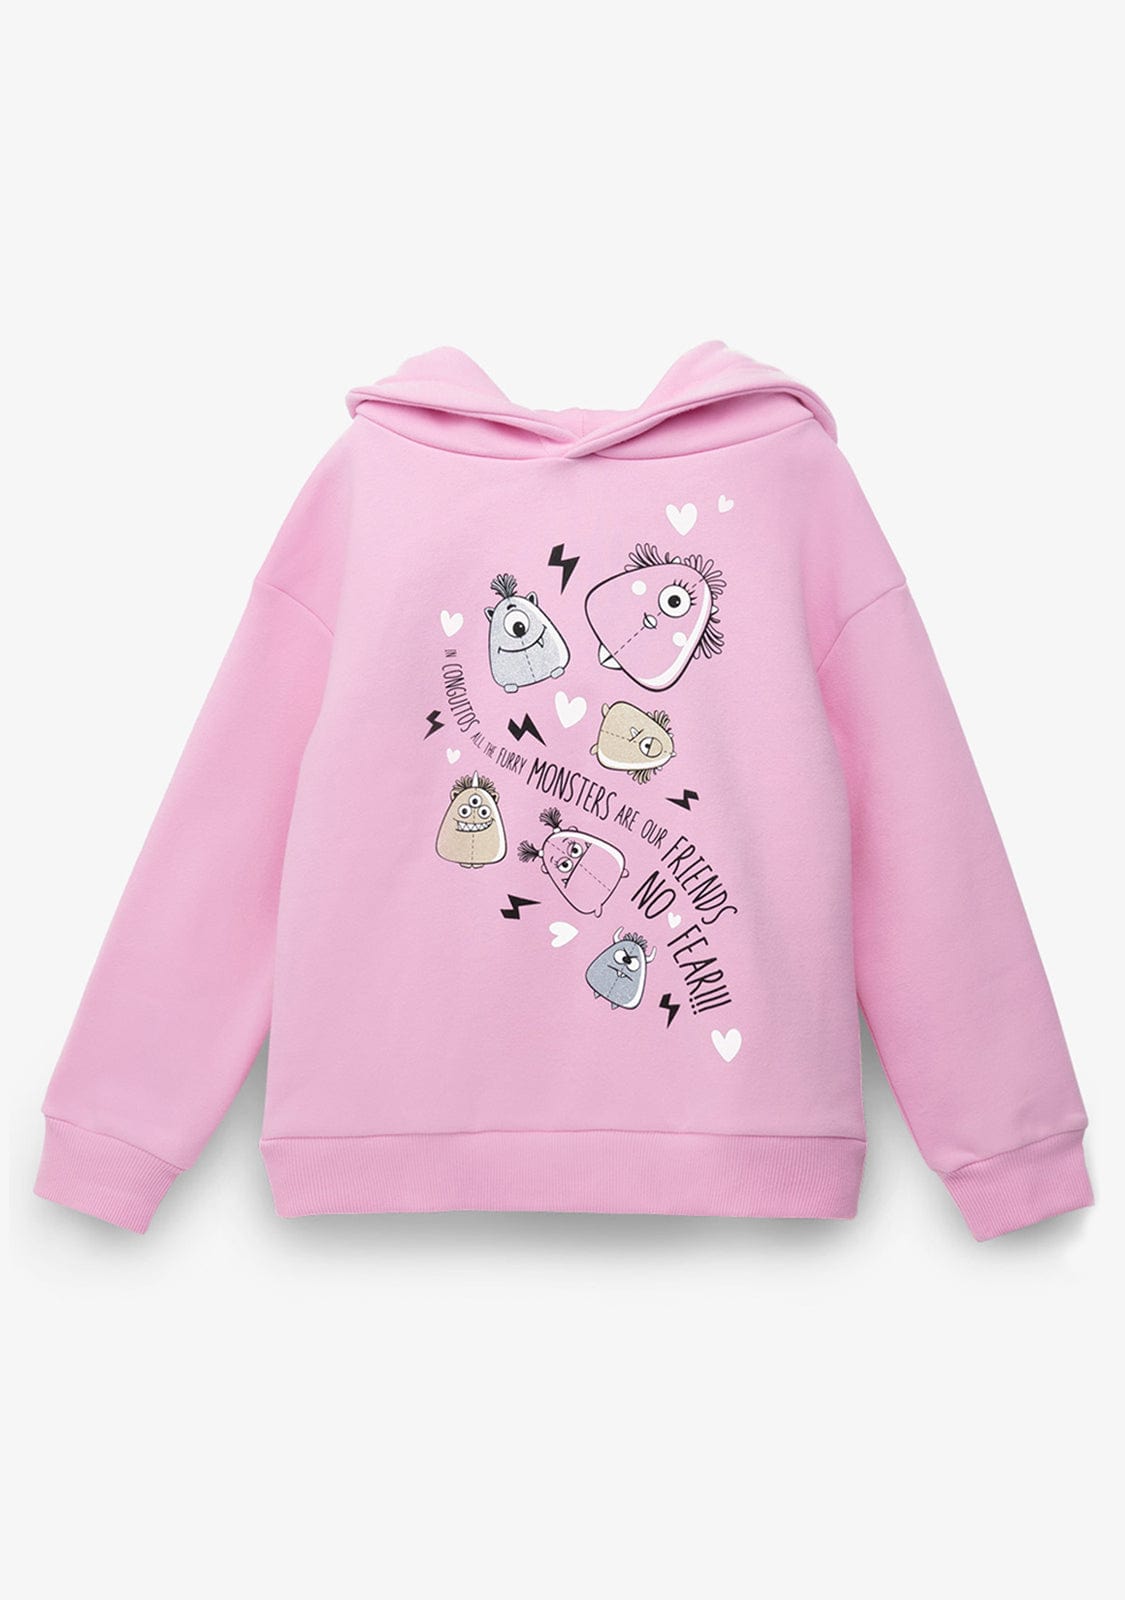 CONGUITOS TEXTIL Clothing Girl's Monsters Pink Hoodie